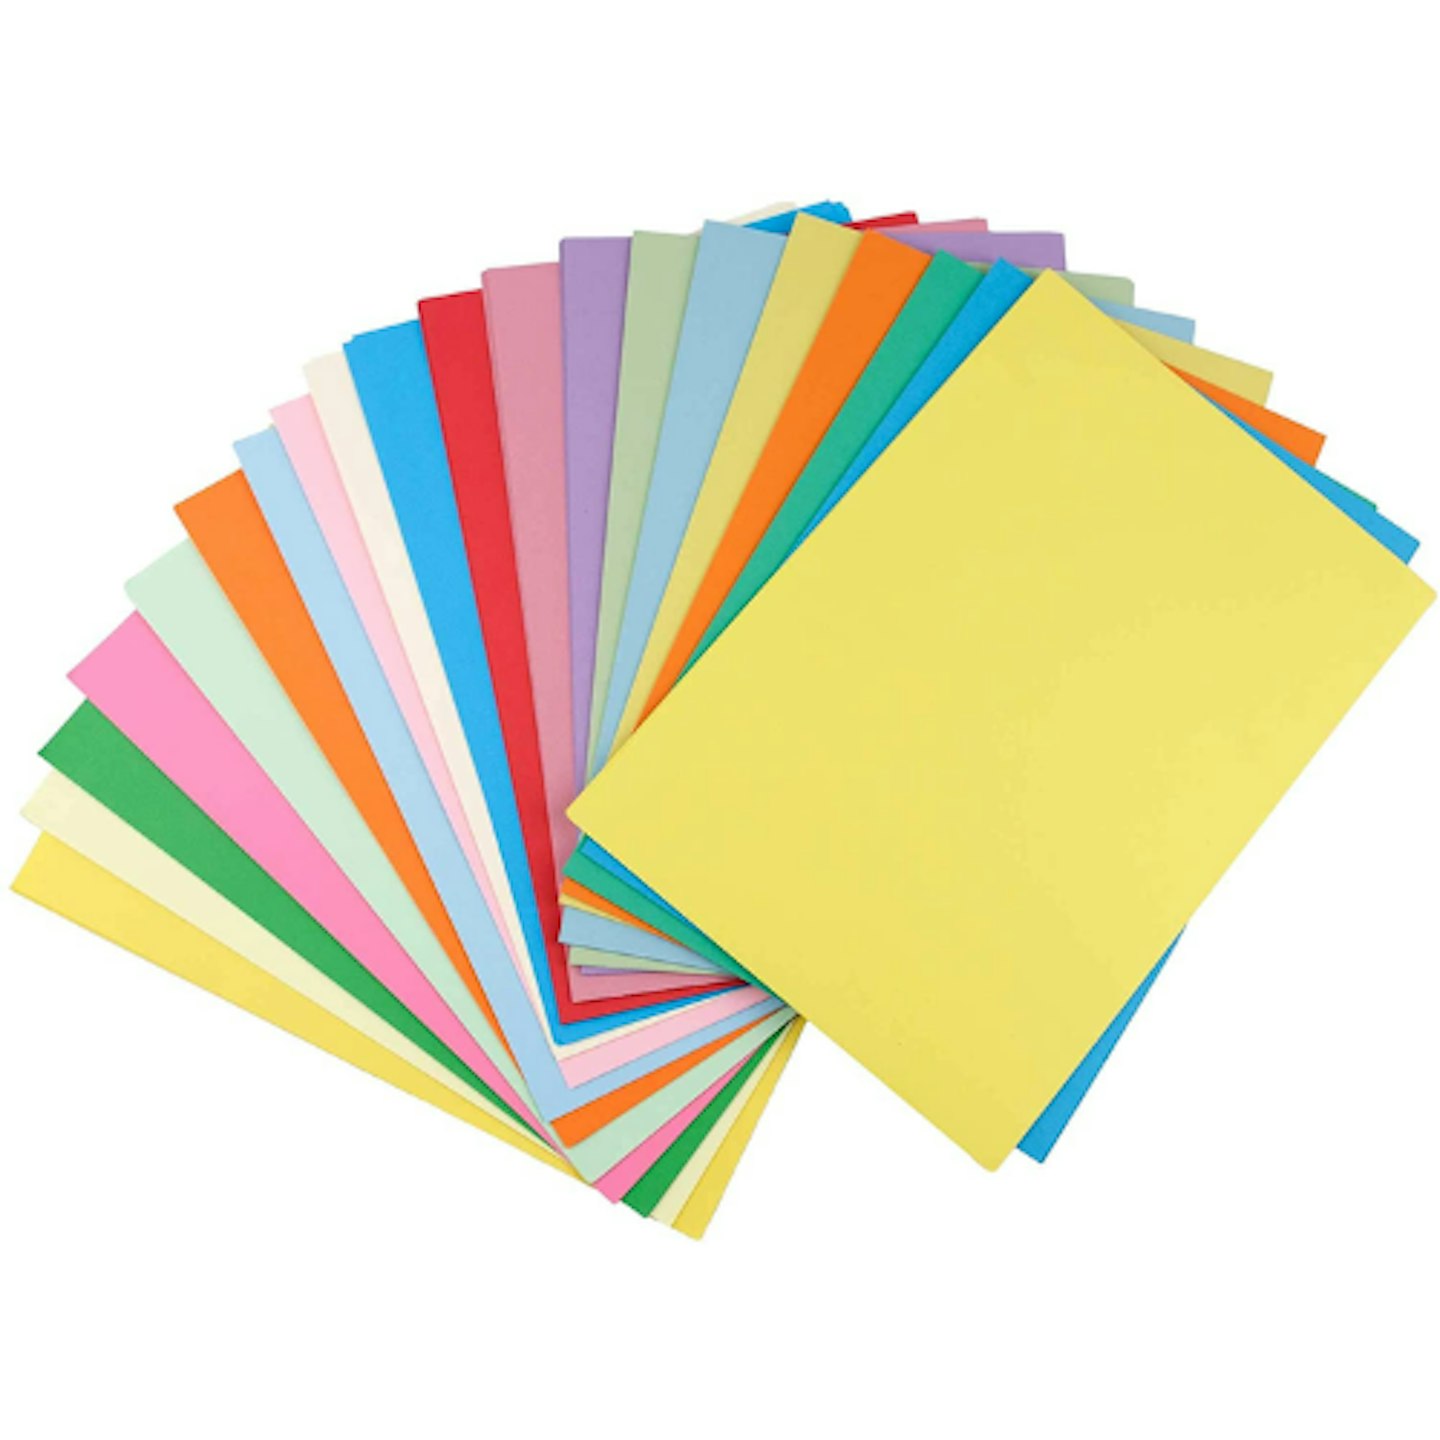 House of Card & Paper A4 Summer Seasons Coloured Card and Paper, Pack of 100 Sheets